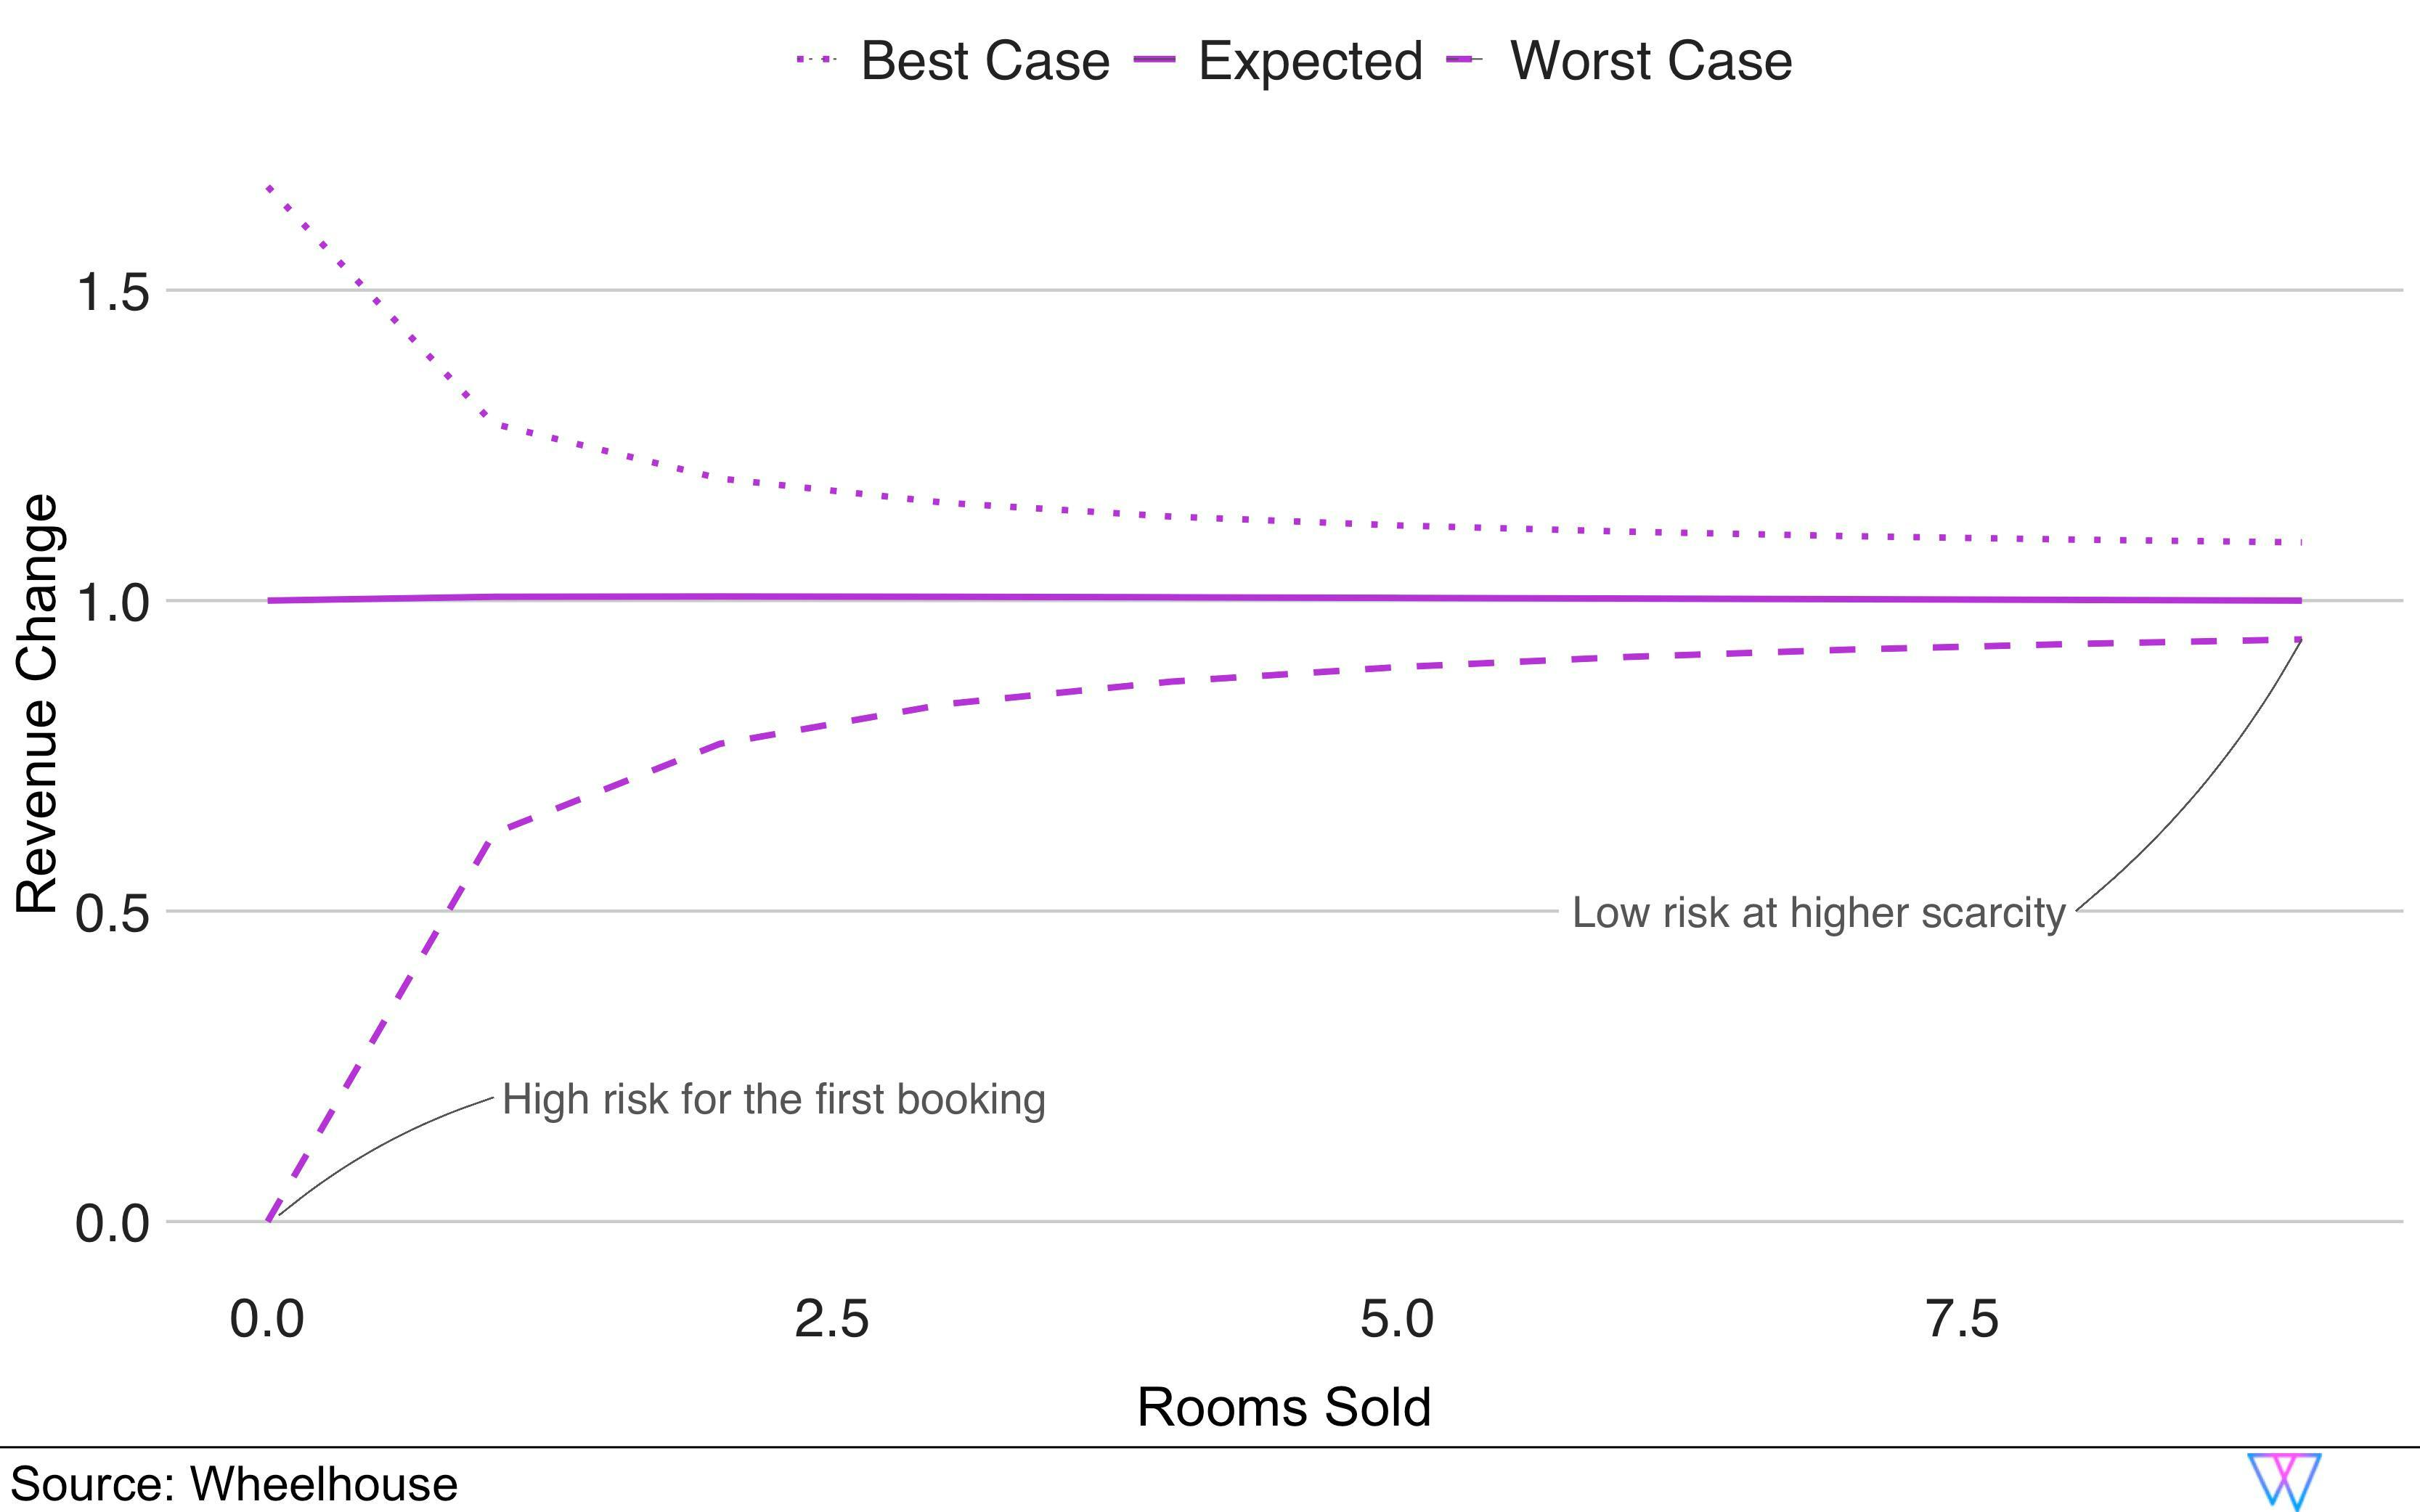 Revenue change by rooms sold as best case, expected and worst case